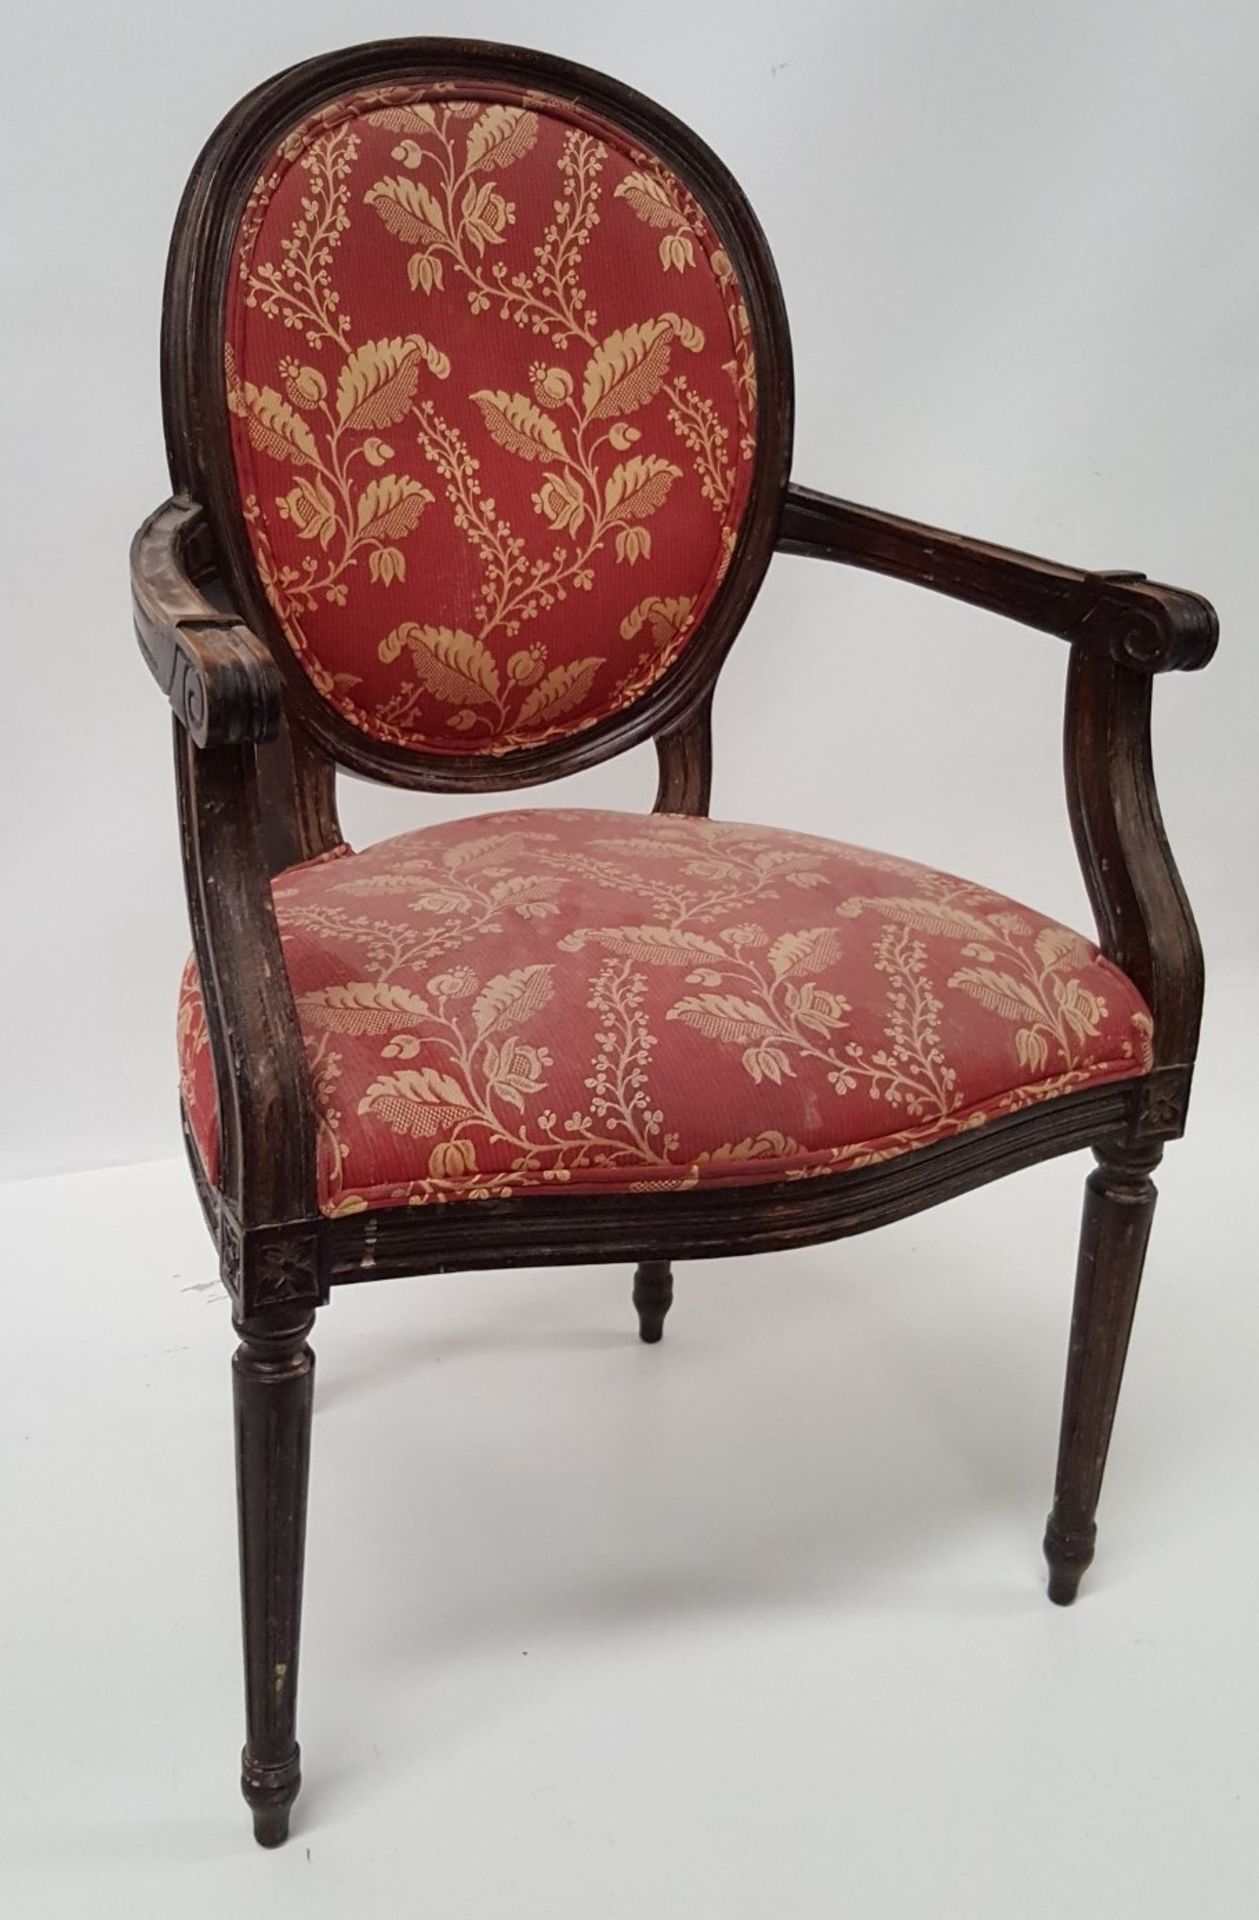 8 x Vintage Wooden Chairs Featuring Spindle Legs, And Upholstered In Red / Gold Floral Fabric -